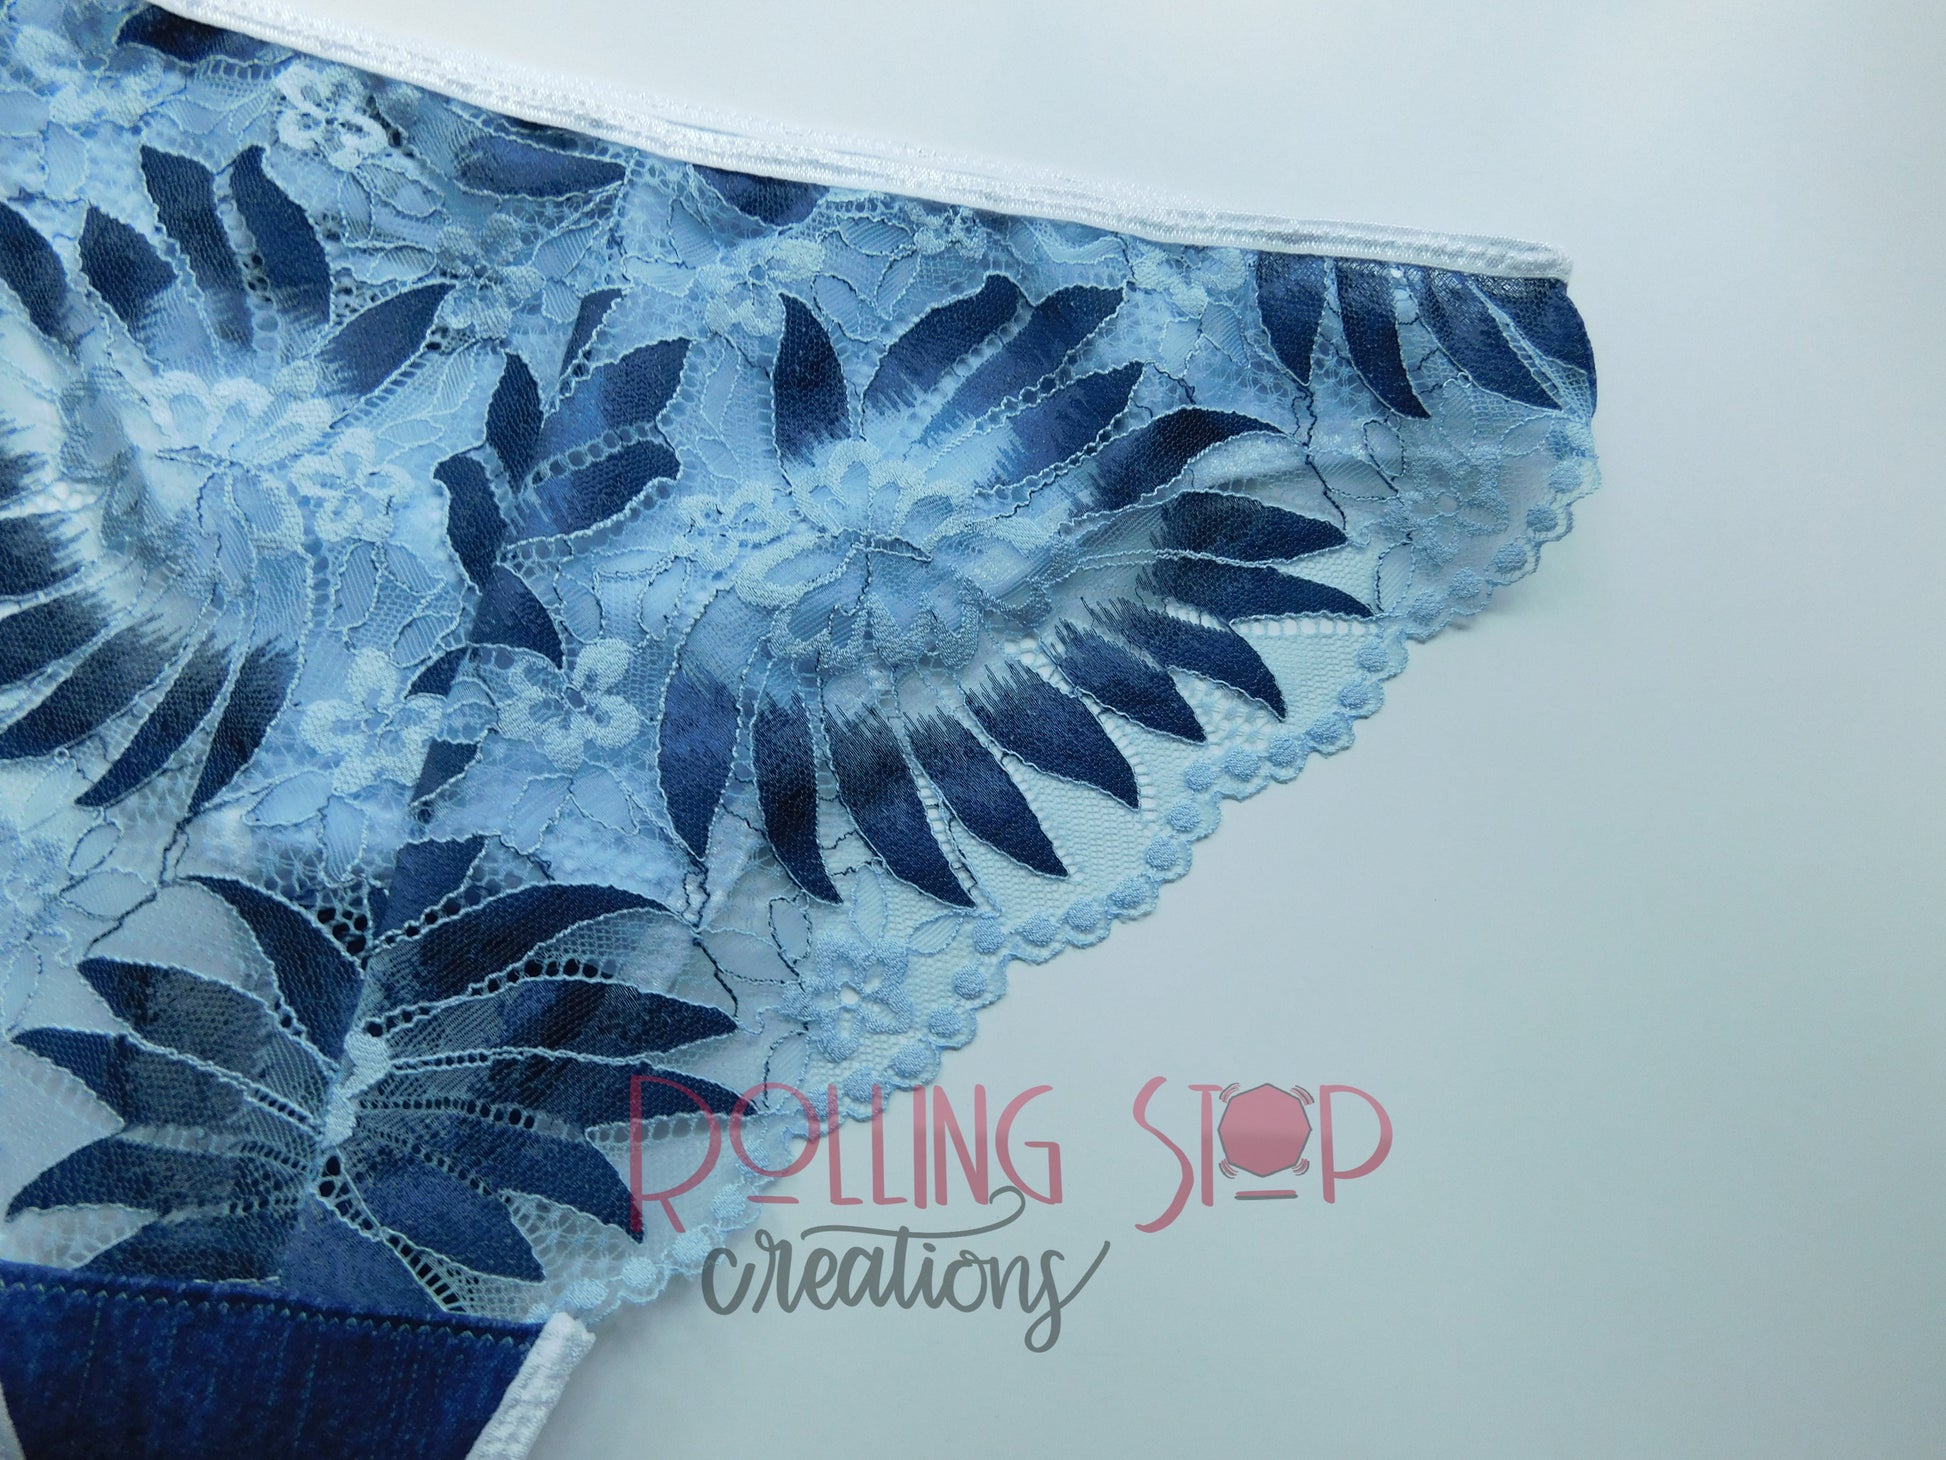 Stacked Pyrex Lace Back Pantydrawls by Rolling Stop Creations sold by Rolling Stop Creations Lace - Lingerie - Panties